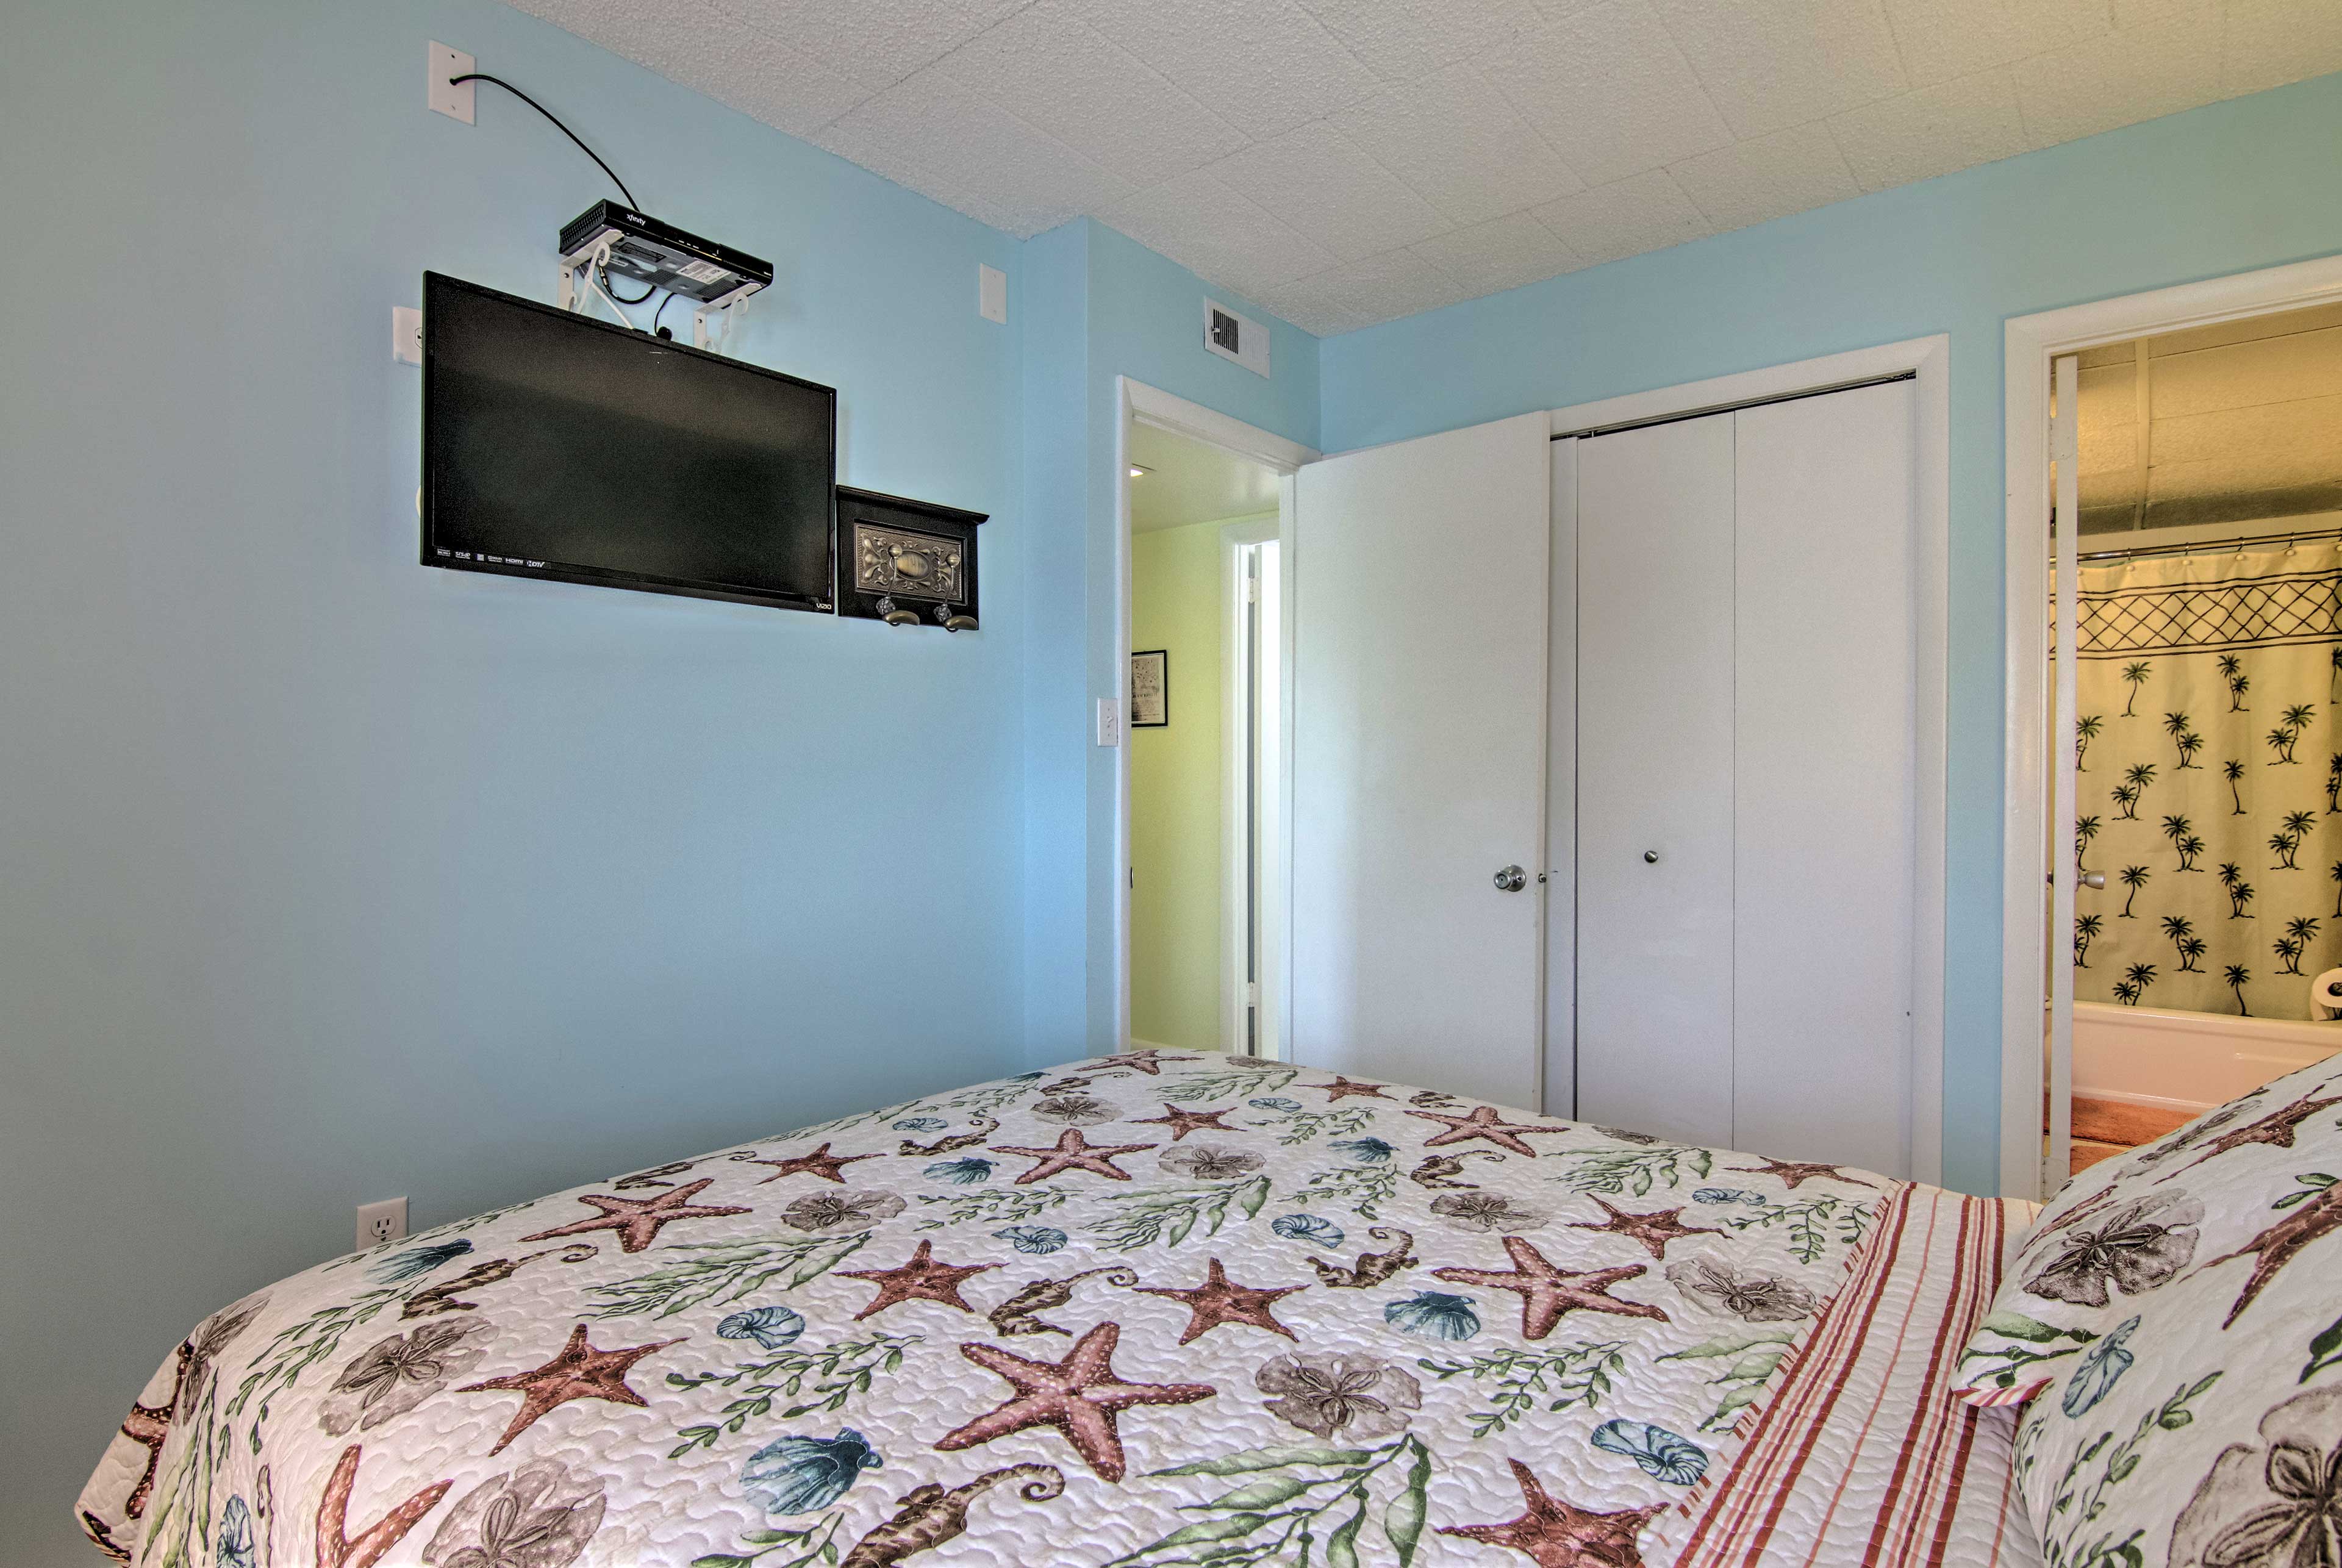 Turn the flat-screen TV on in the primary bedroom and watch your favorite show!